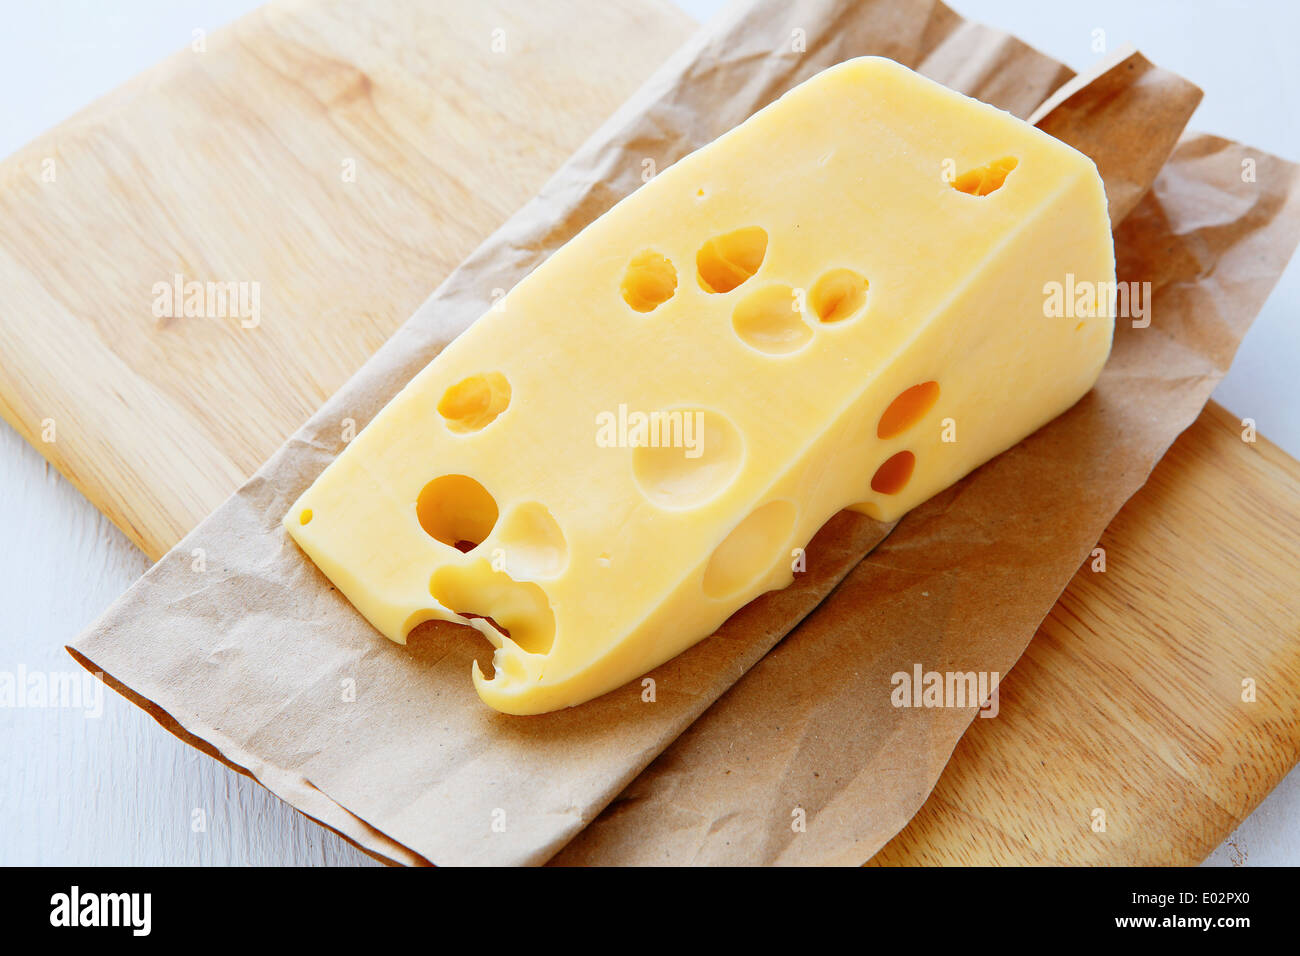 piece of cheese with holes, food closeup Stock Photo